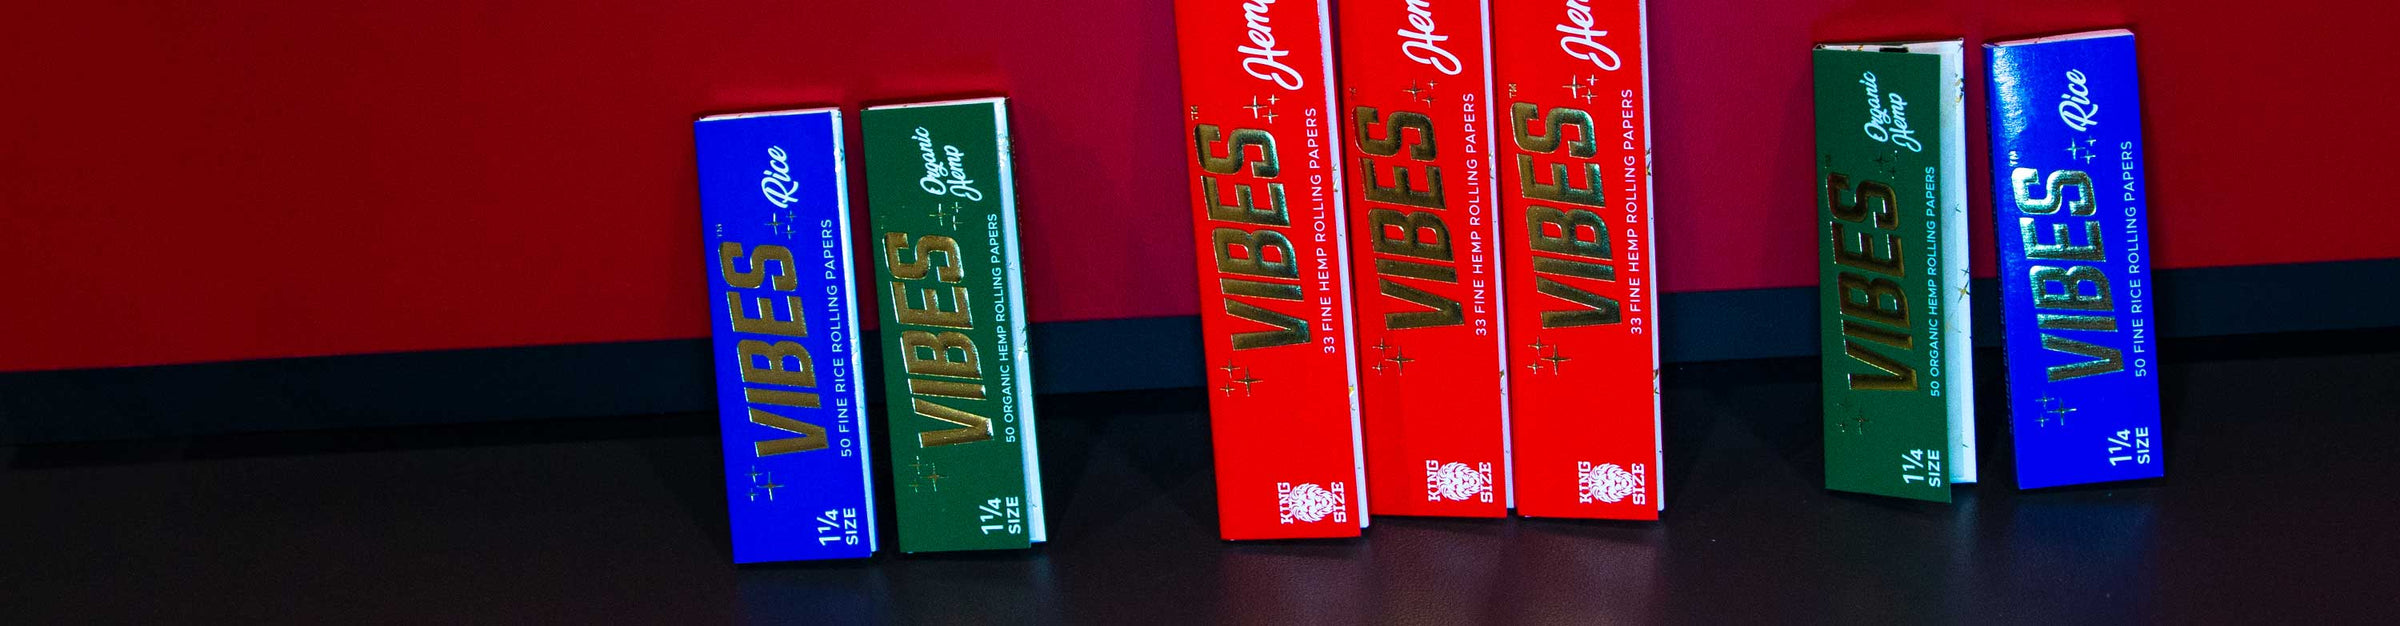 Got Vape Retail Rolling Accessories standing against table with red background.